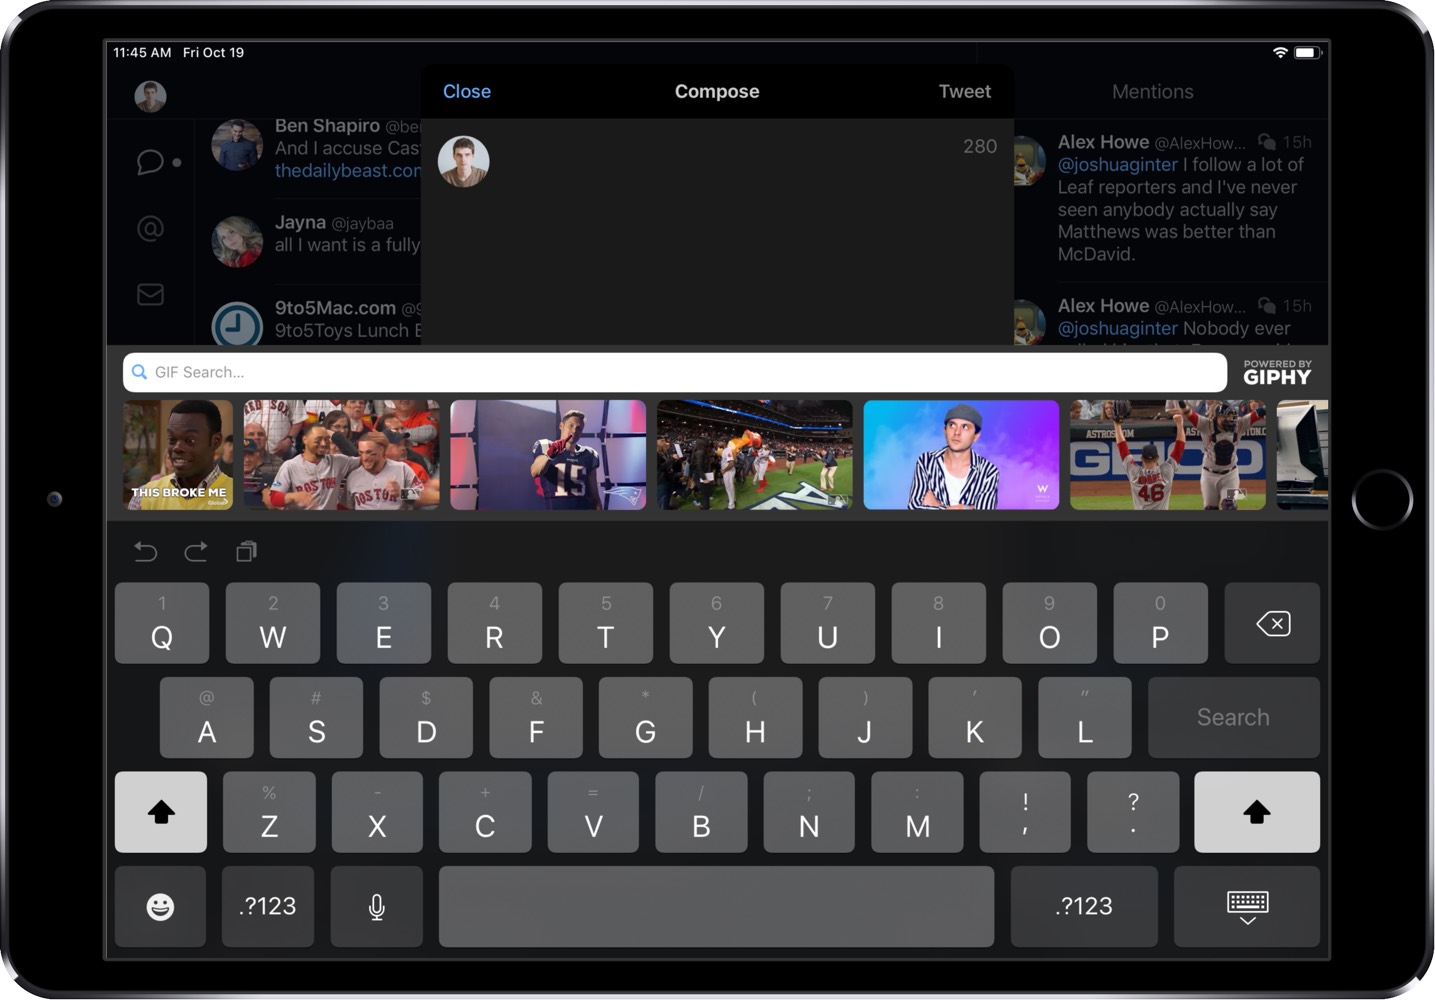 GIPHY in Tweetbot 5